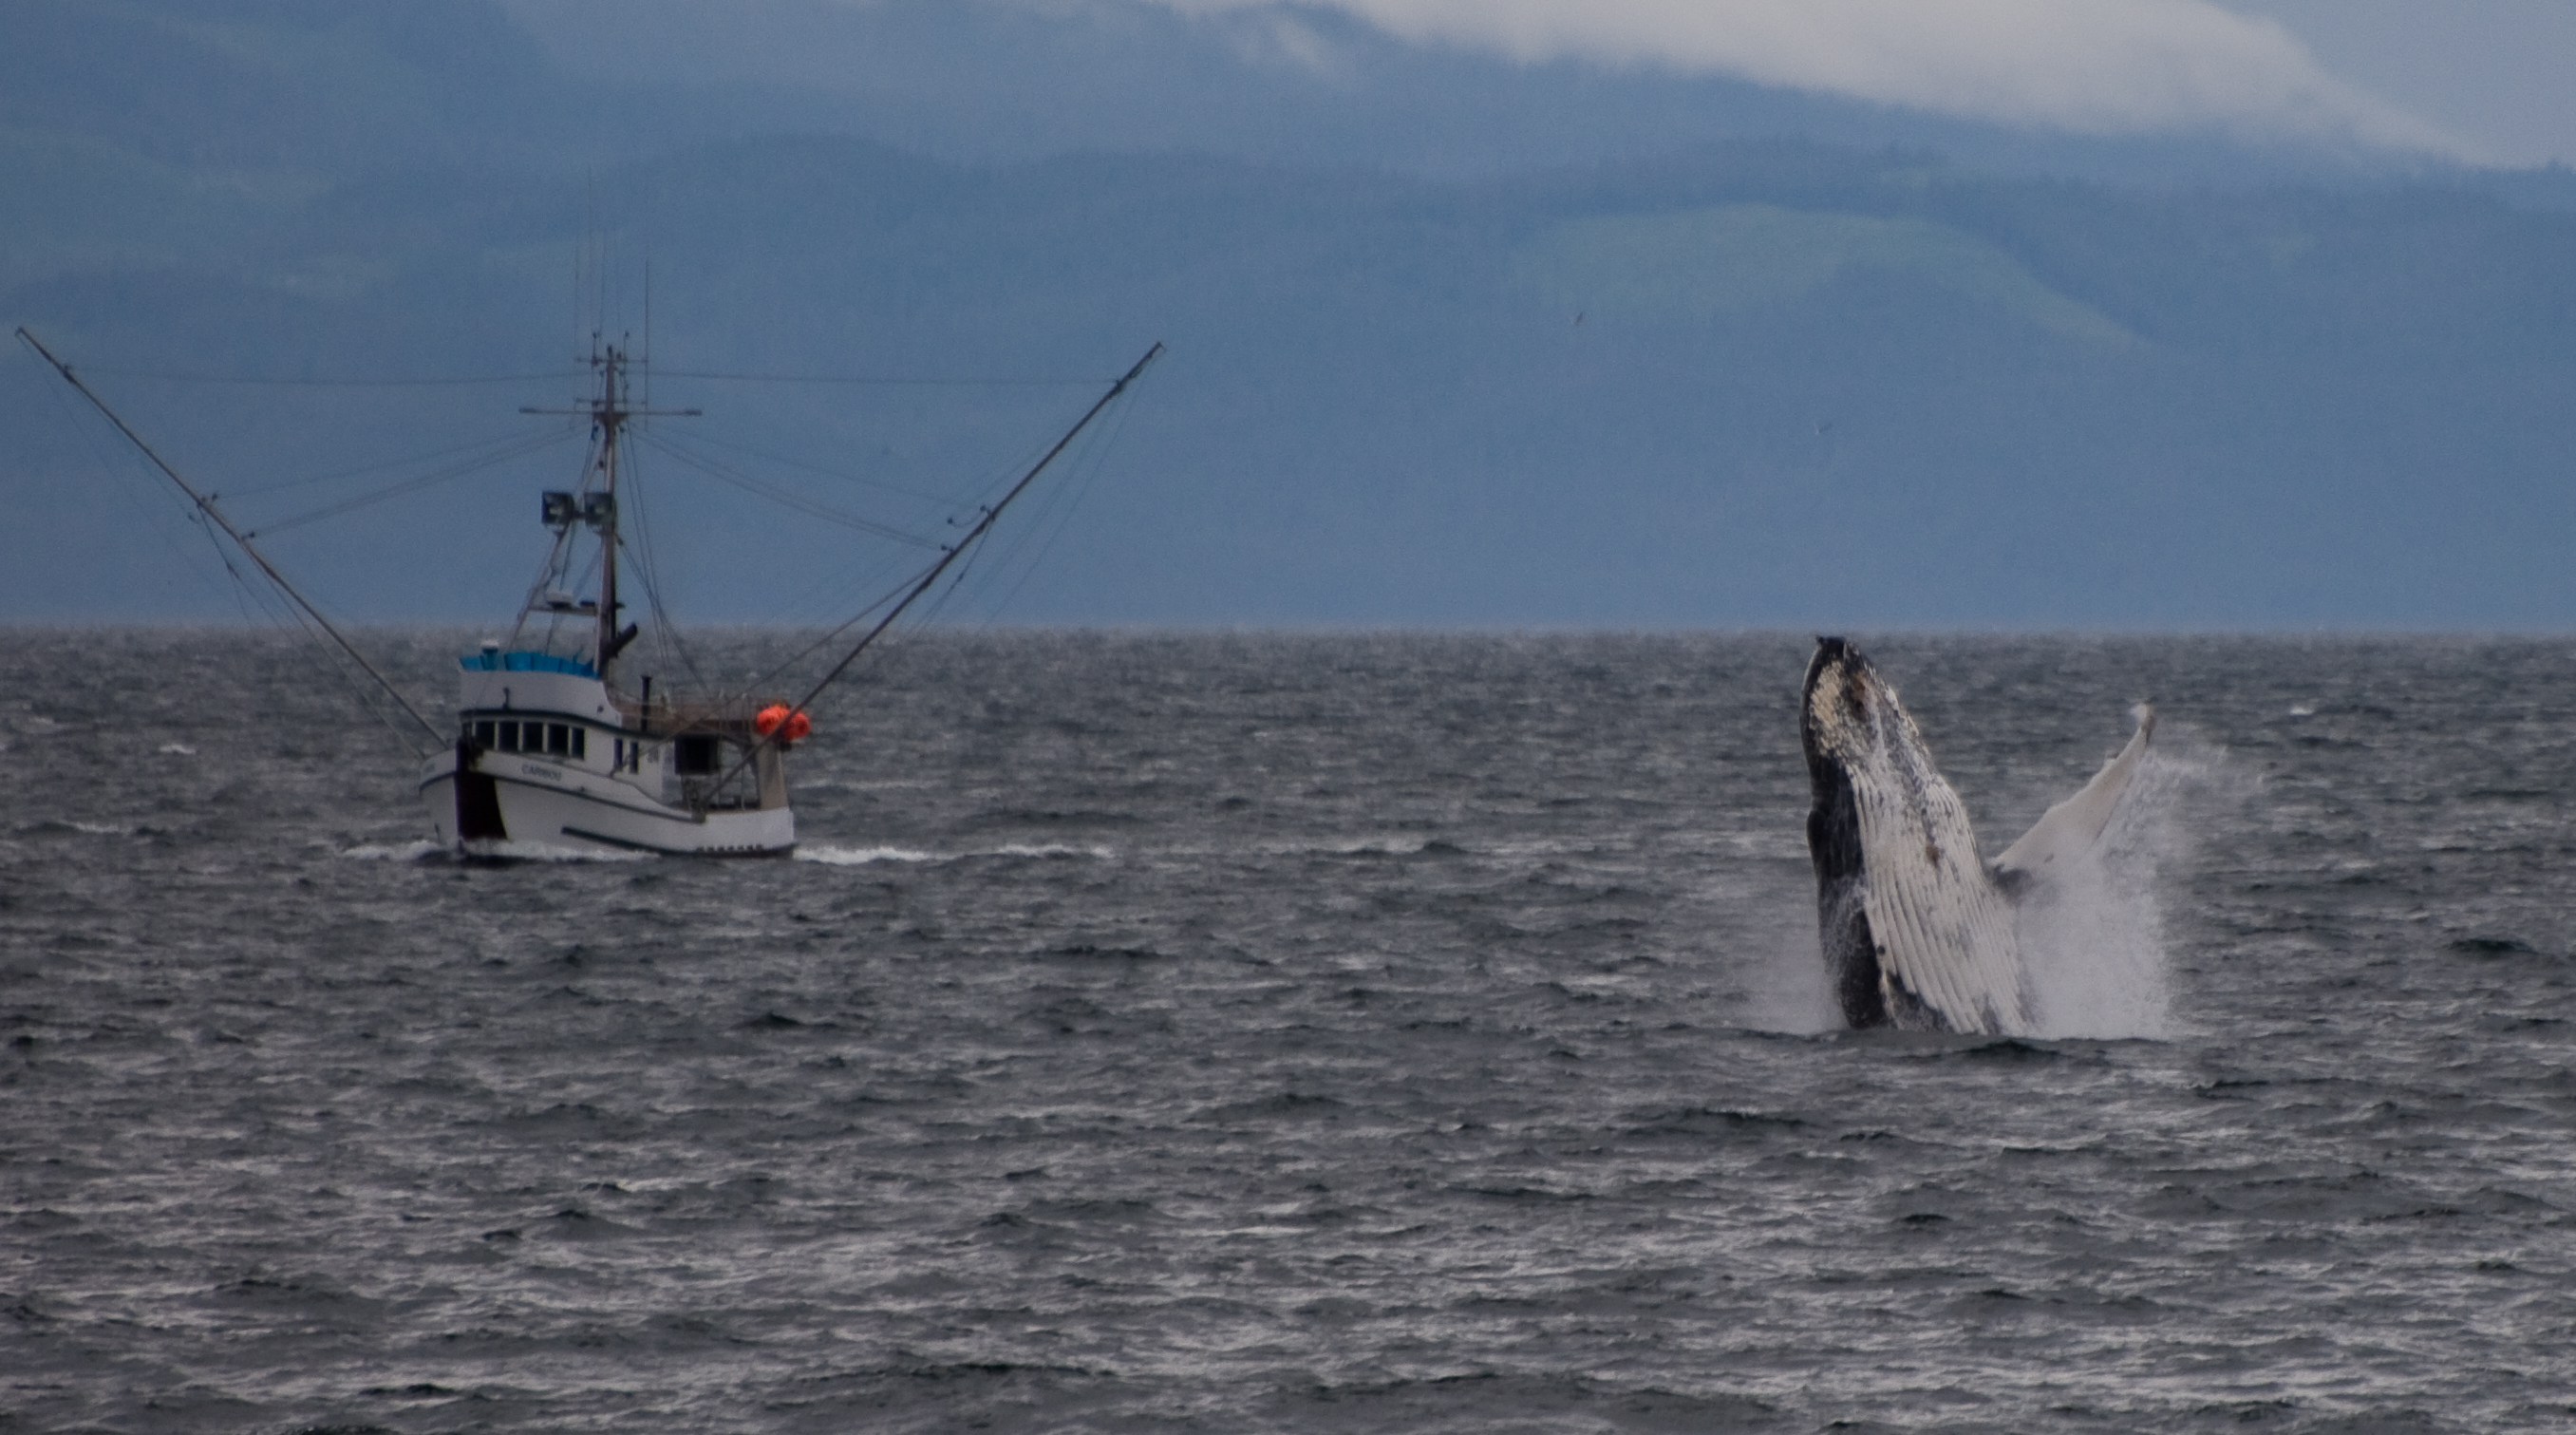 Humpback Whale breaches in sight of vessel